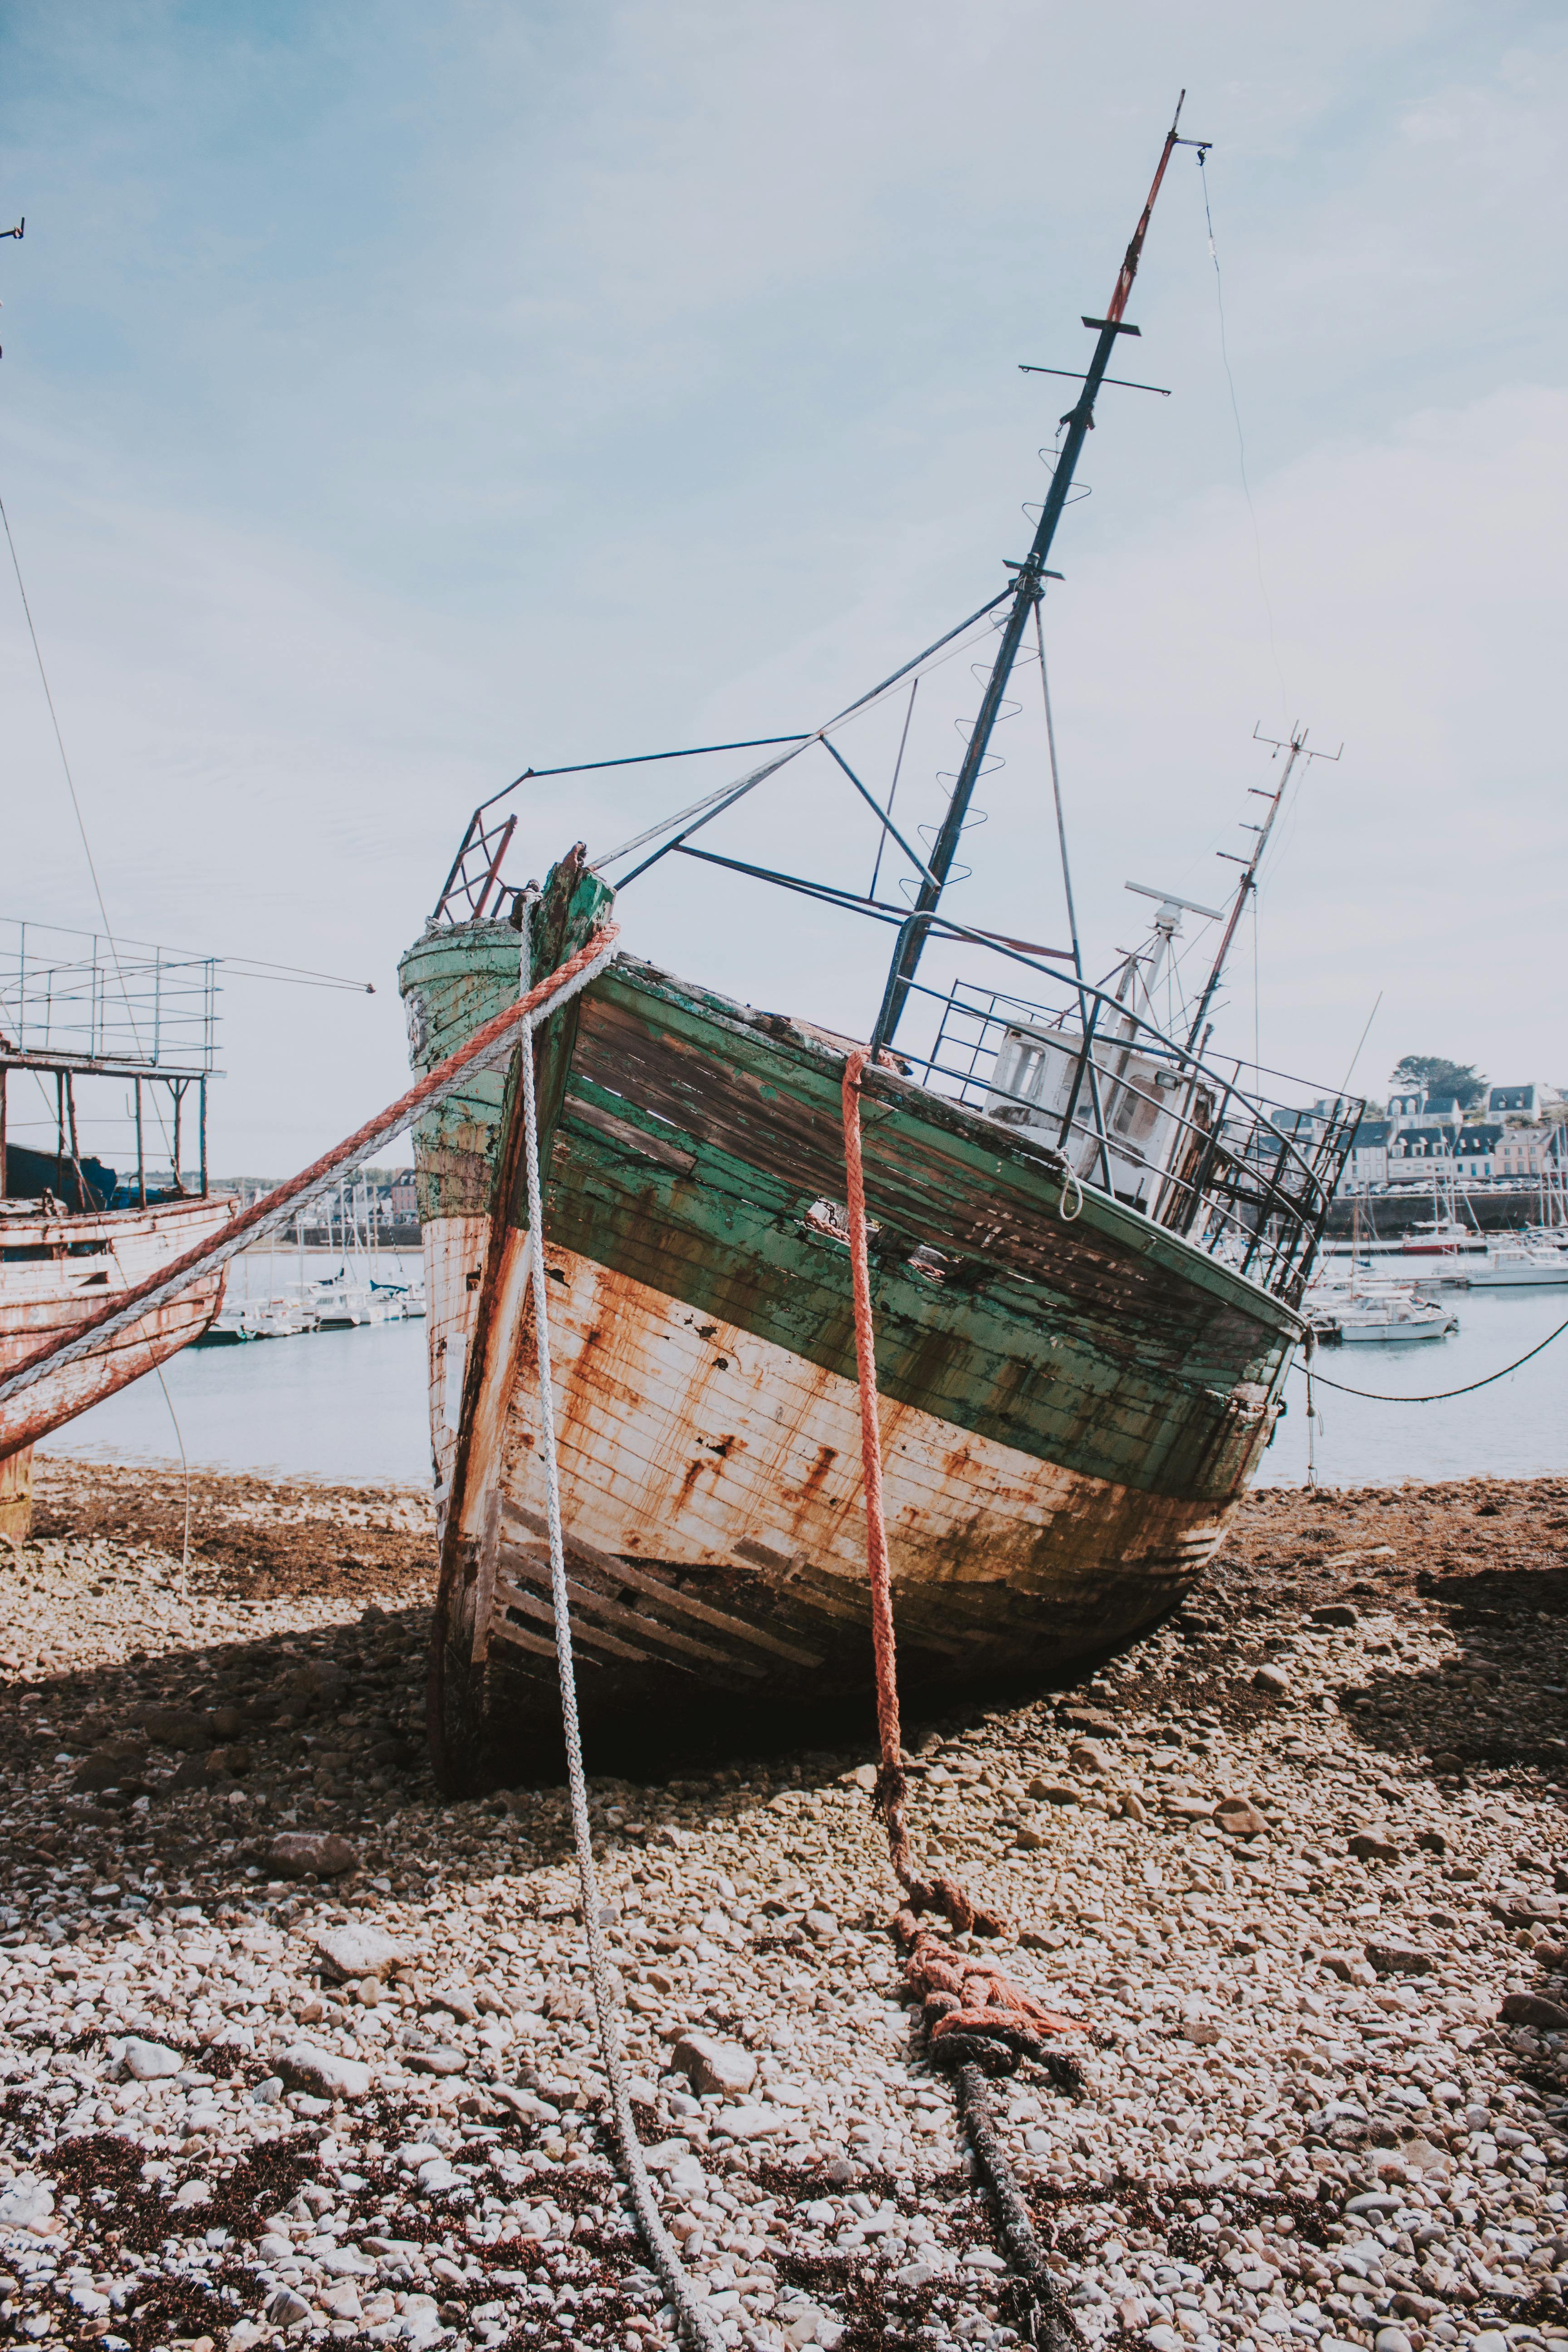 Old small wooden fishing boats on river side · Free Stock Photo